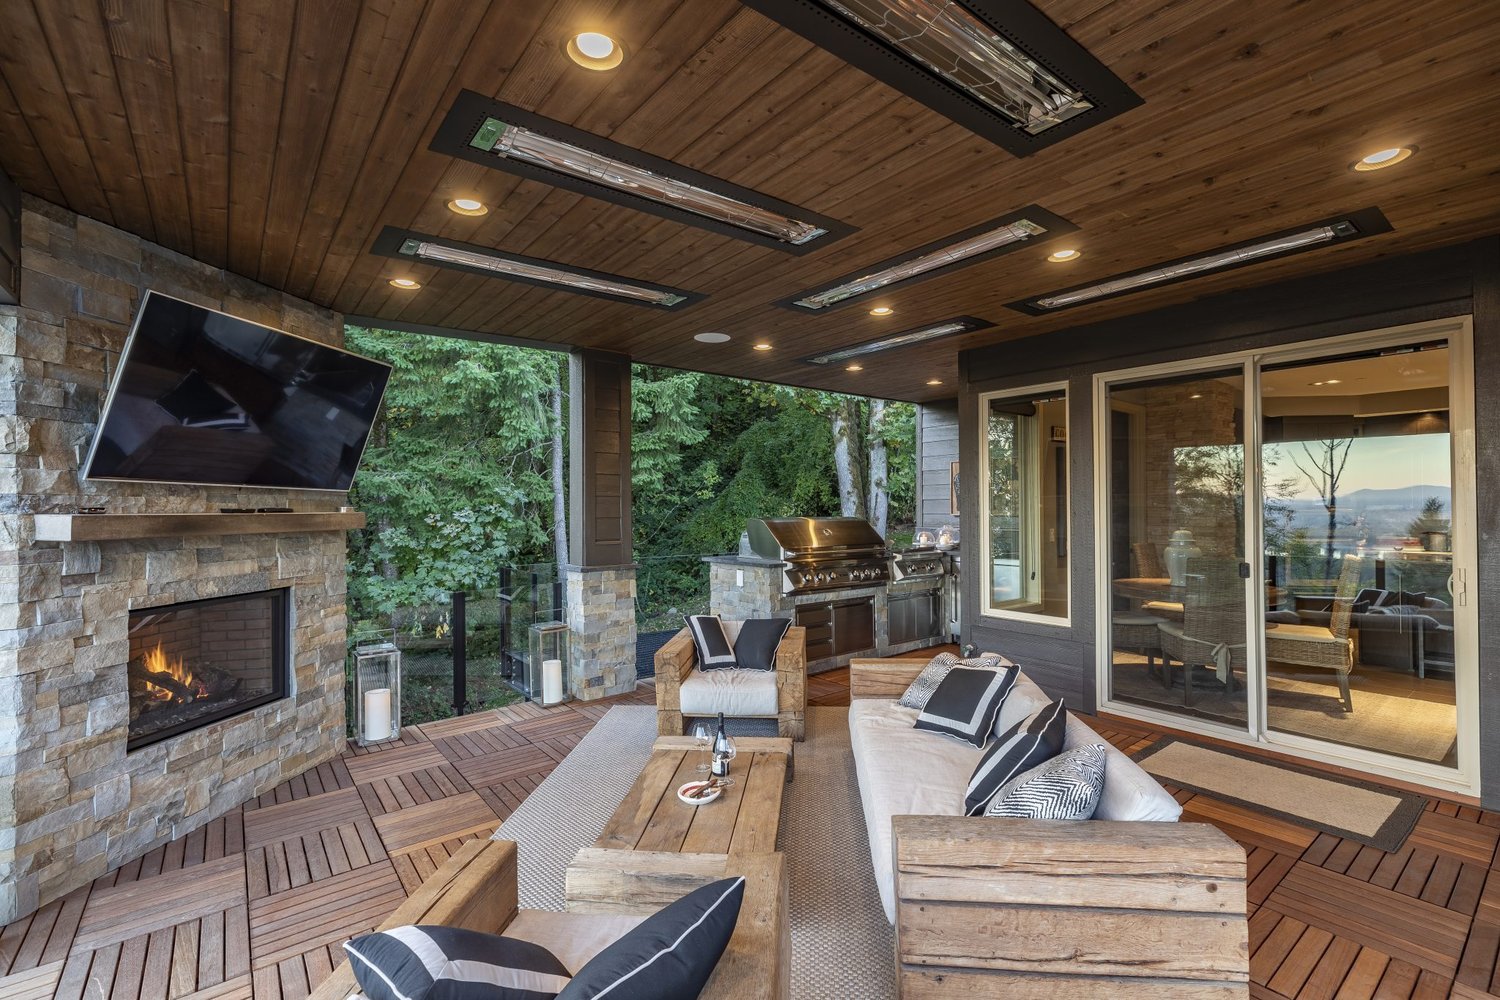 A back patio with a fireplace GRO completed is pictured.